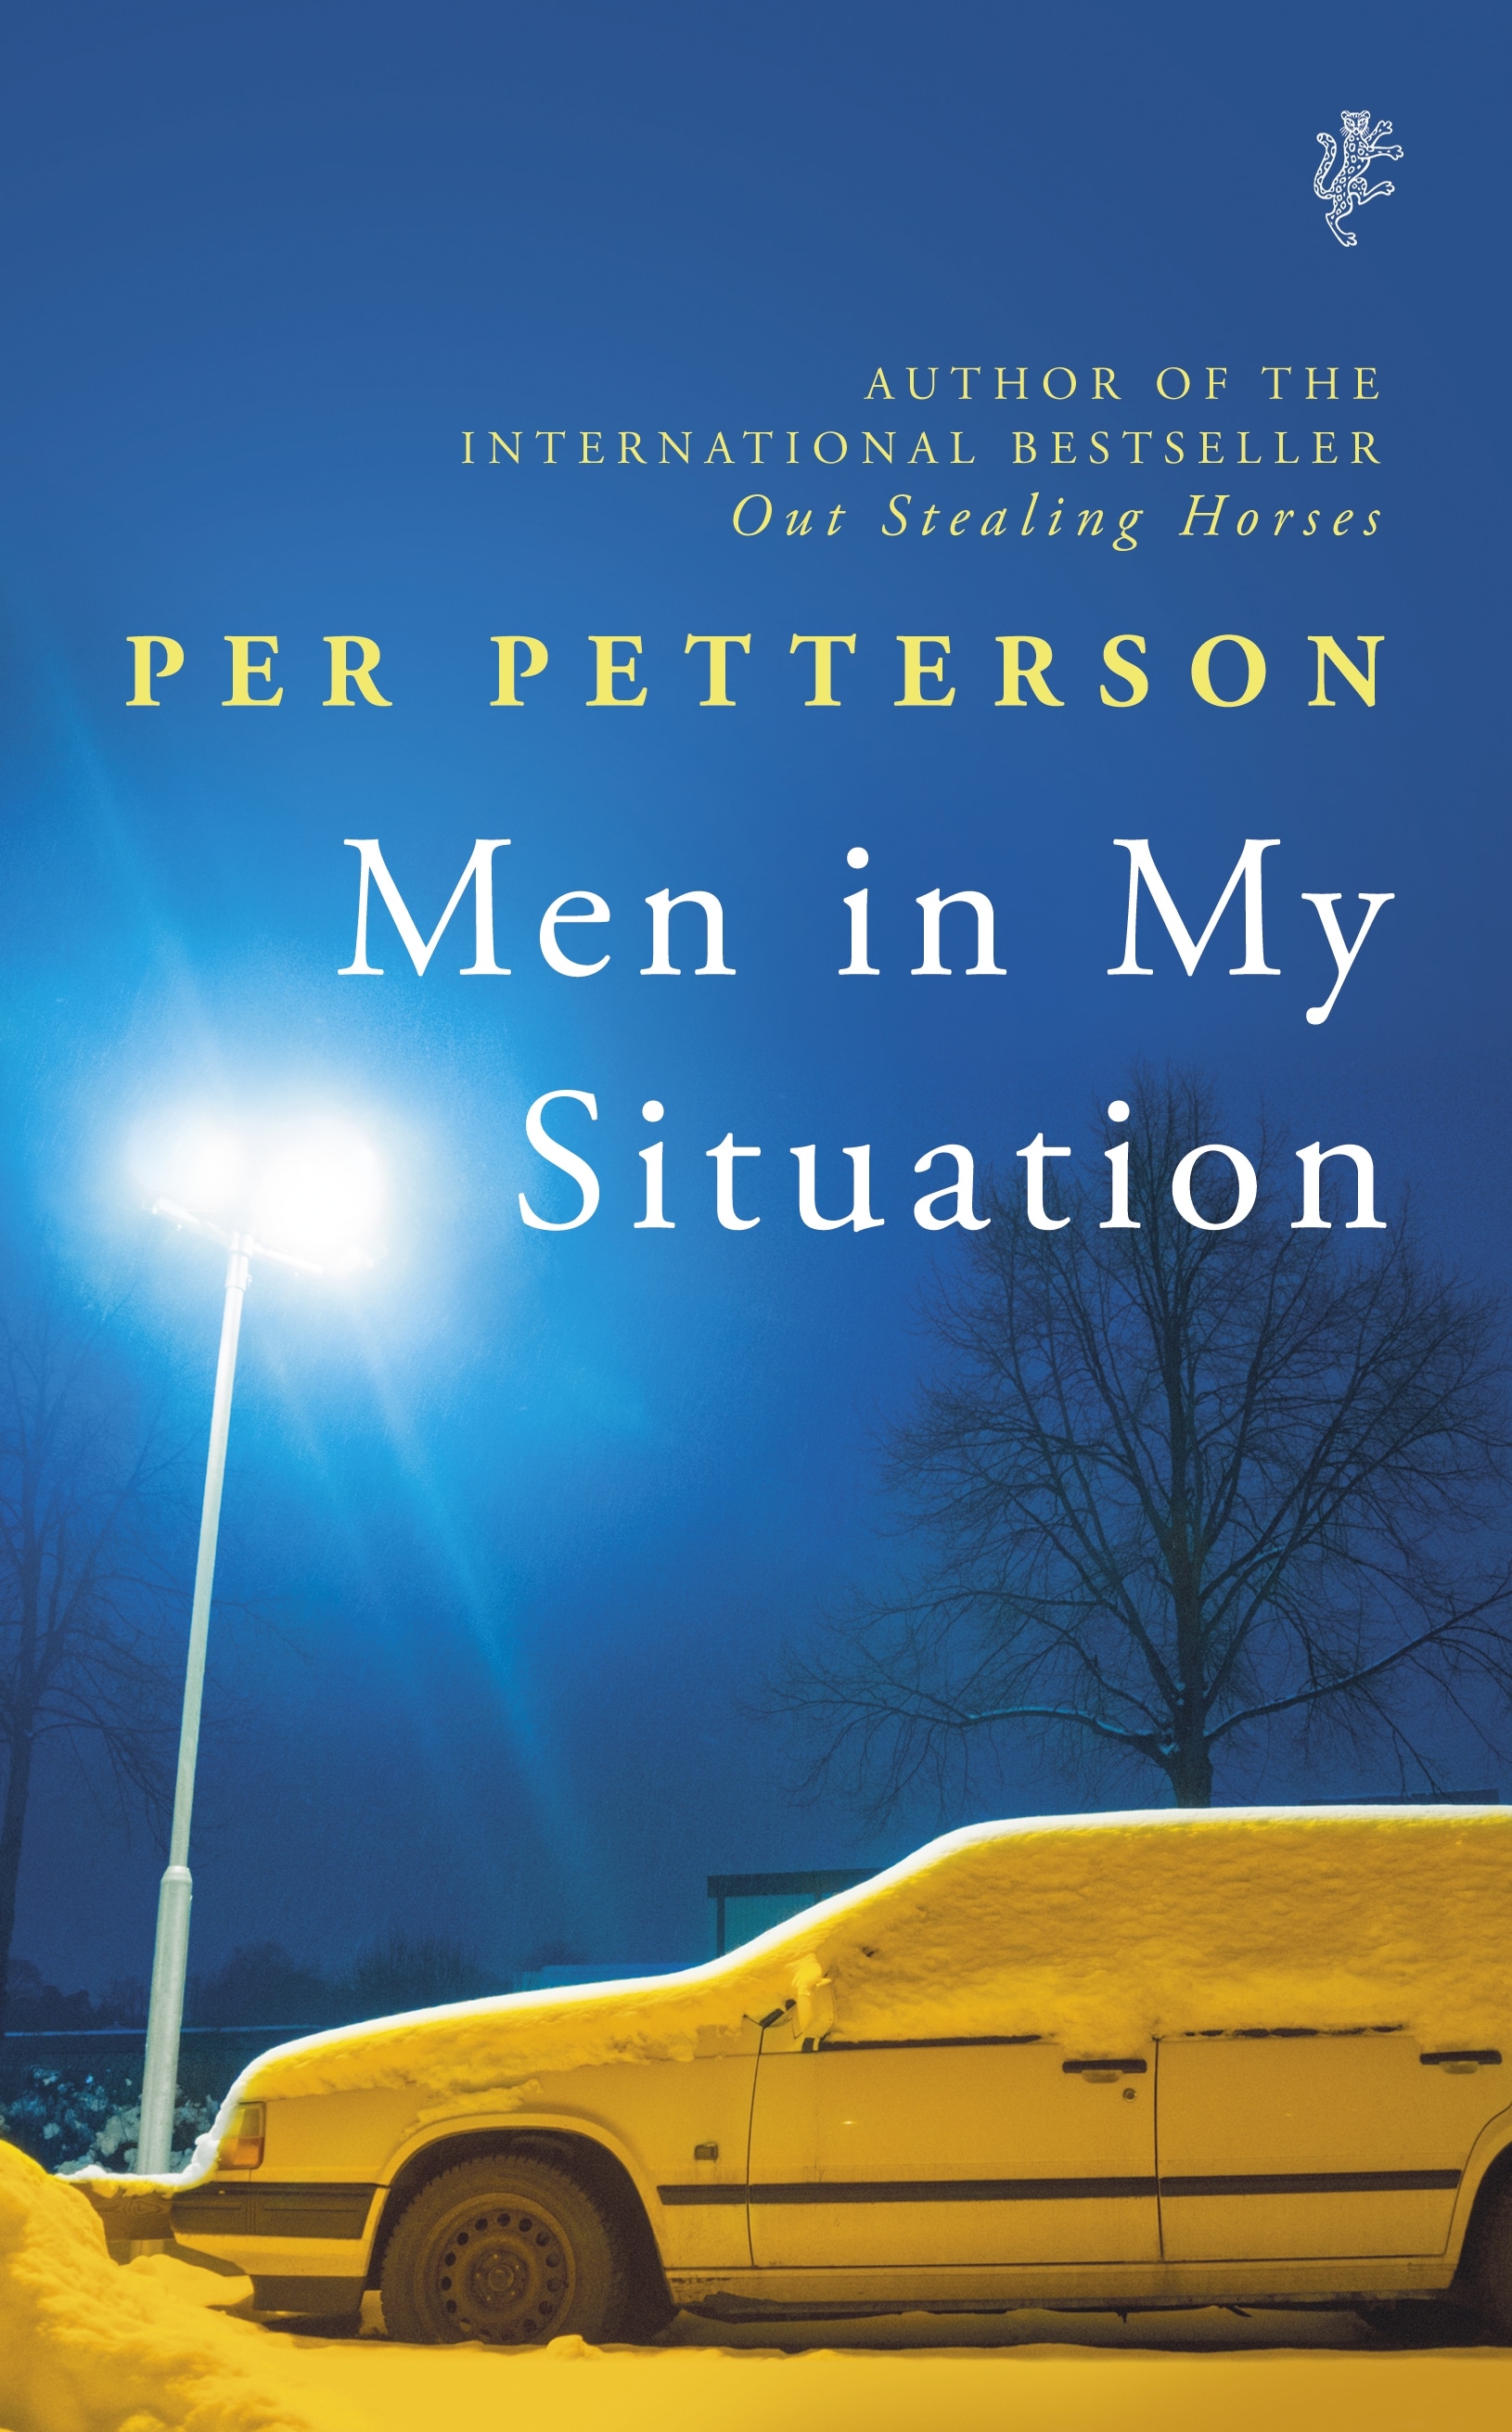 Book “Men in My Situation” by Per Petterson — August 5, 2021